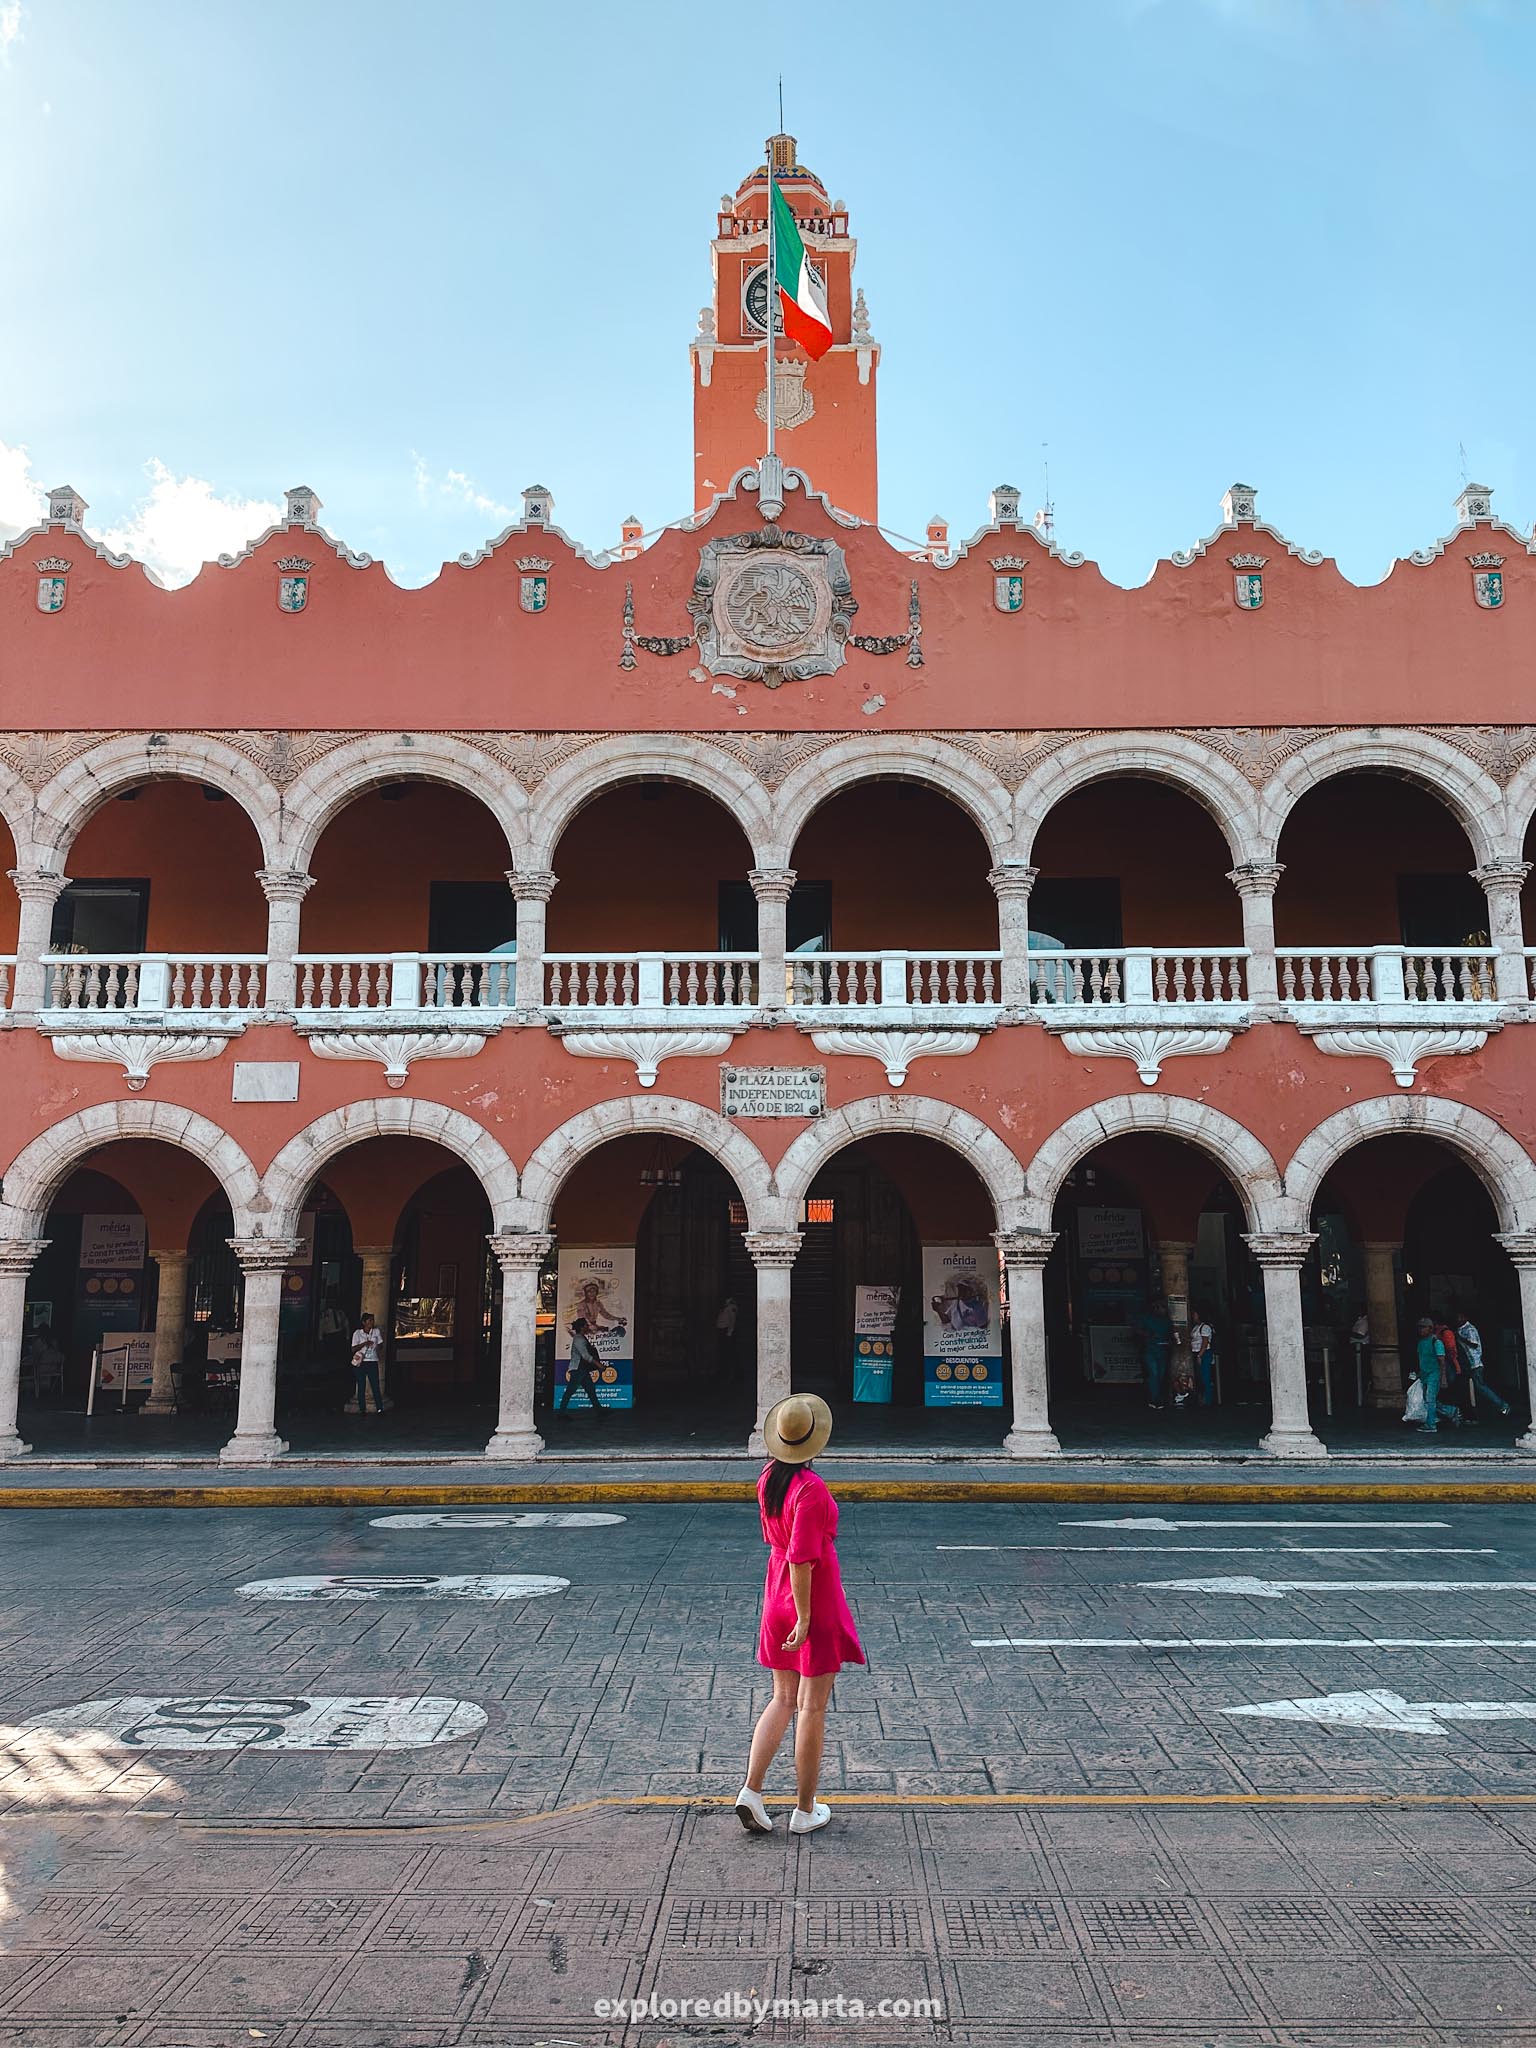 Merida, Mexico - the red-colored Palacio Municipal de Mérida palace featuring archways and views over Plaza Grande square